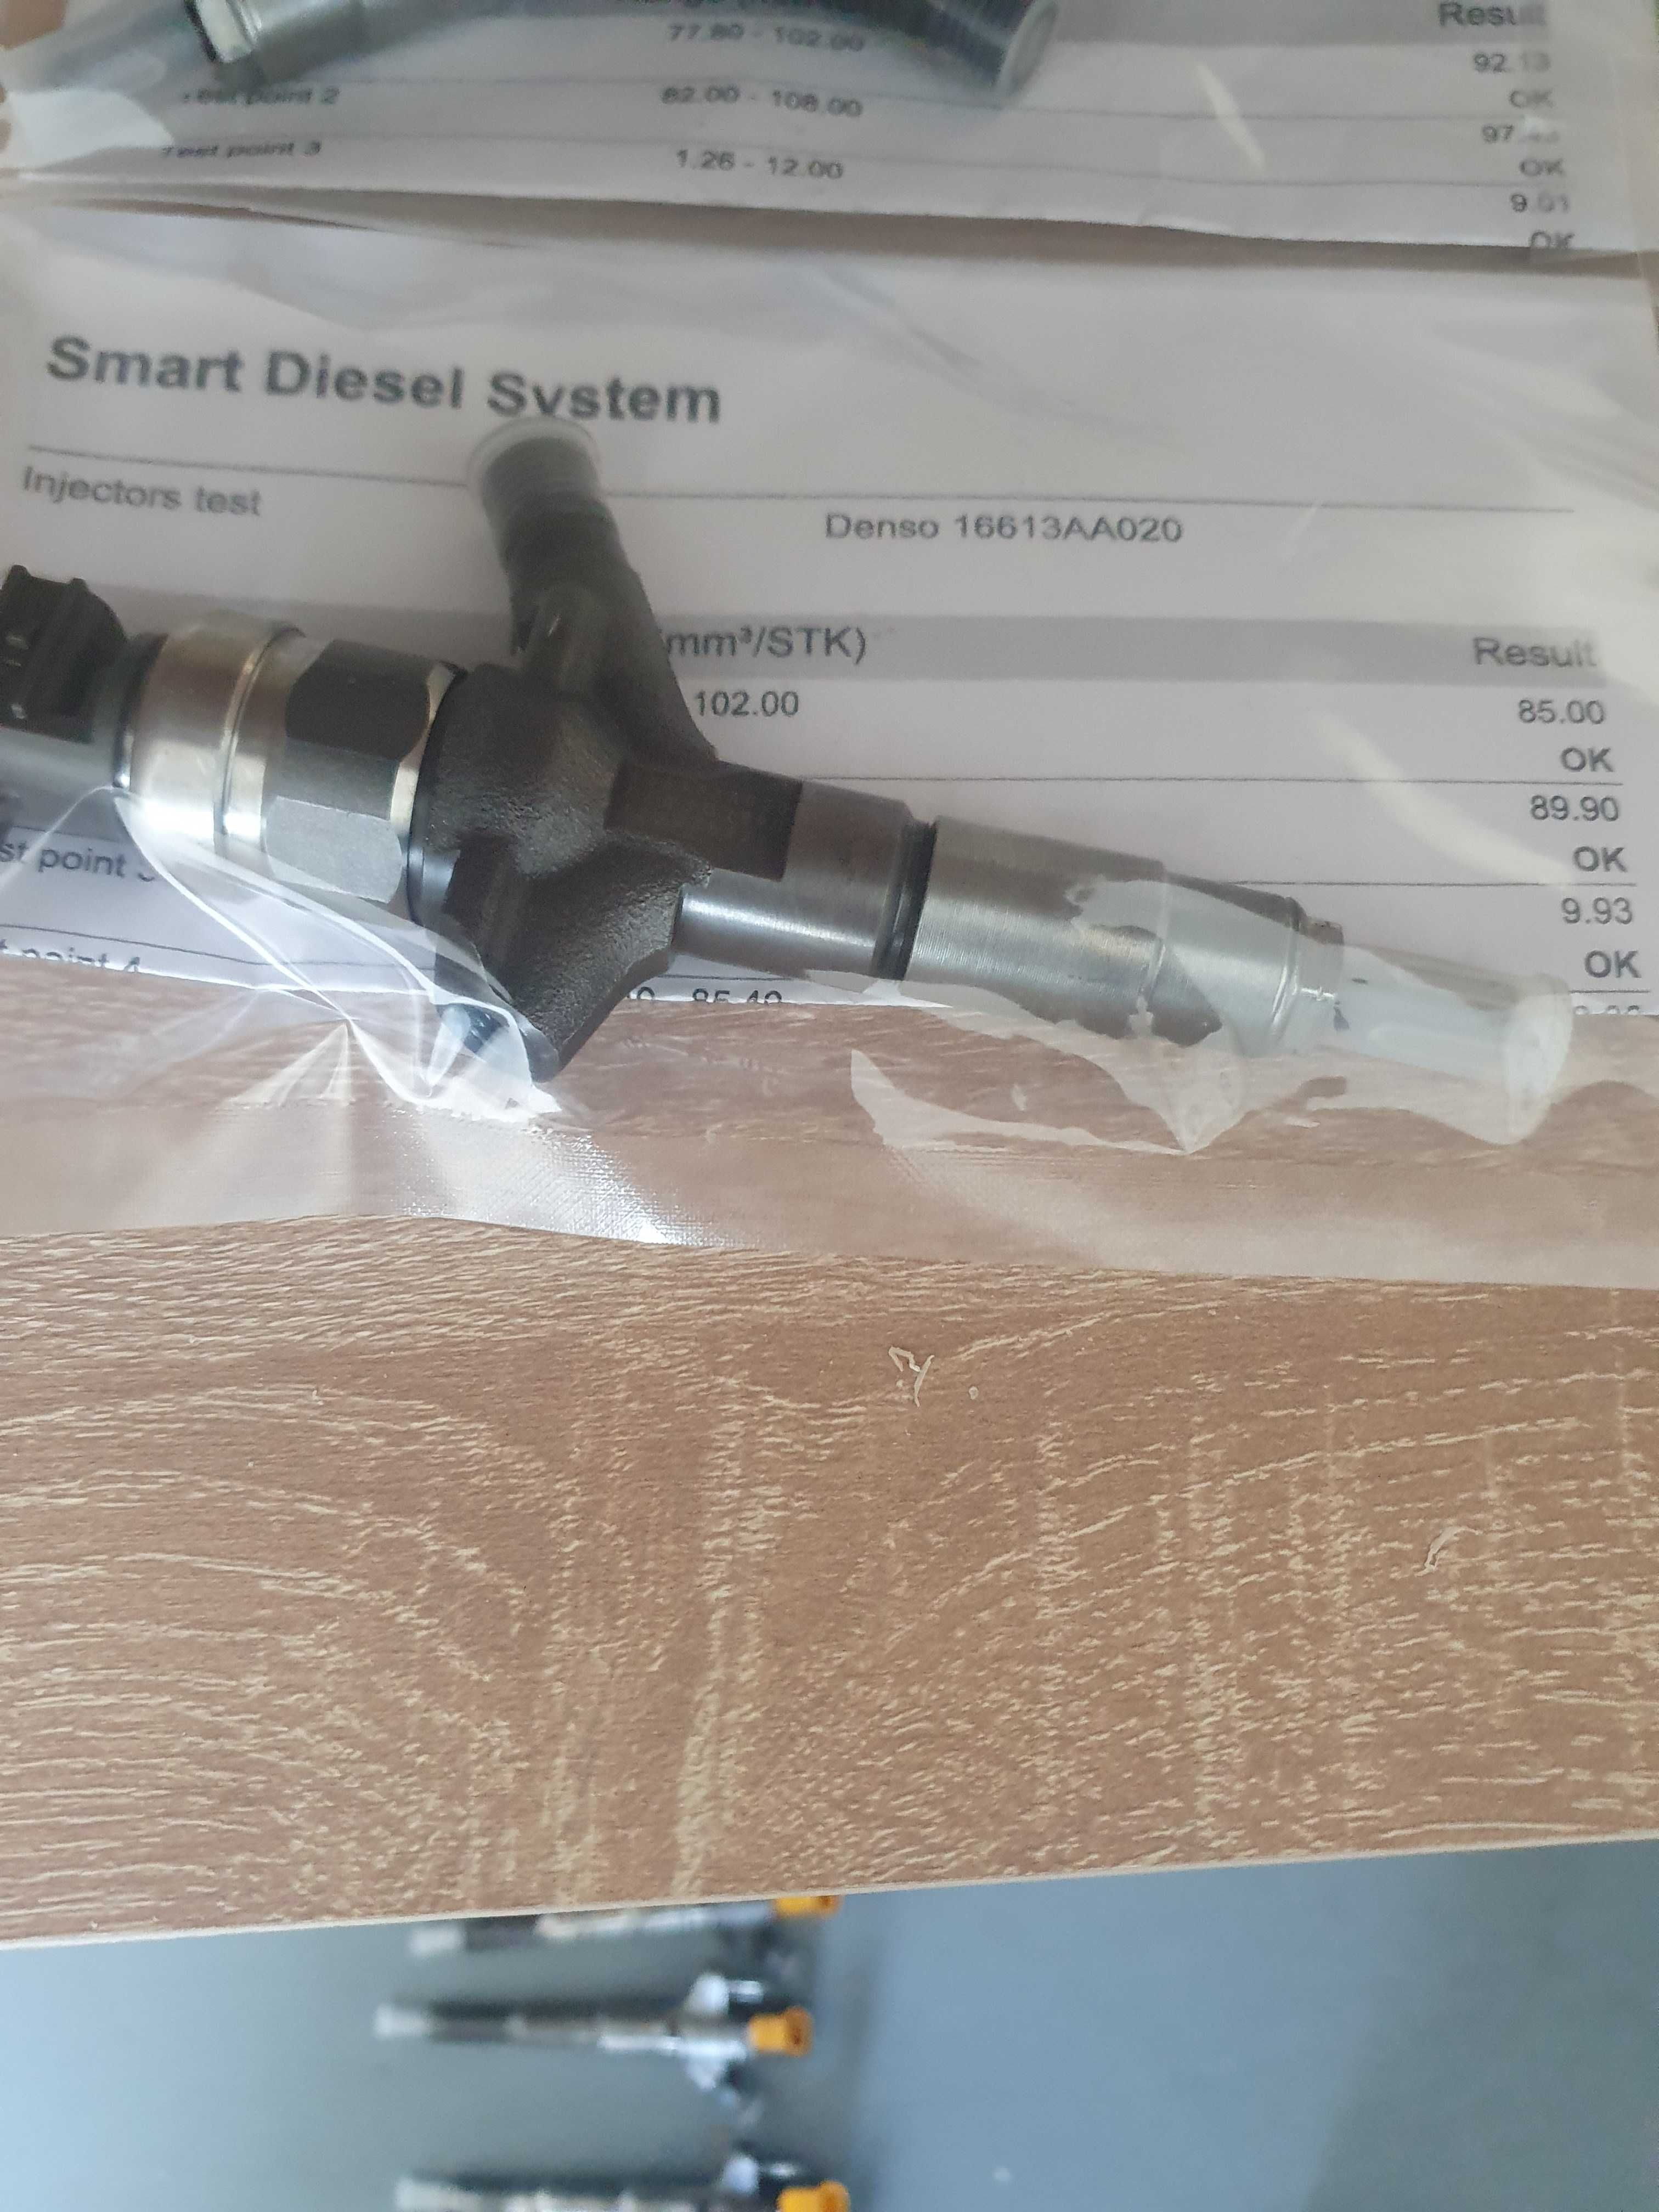 Injectoate reconditionate Denso cod 16613aa020